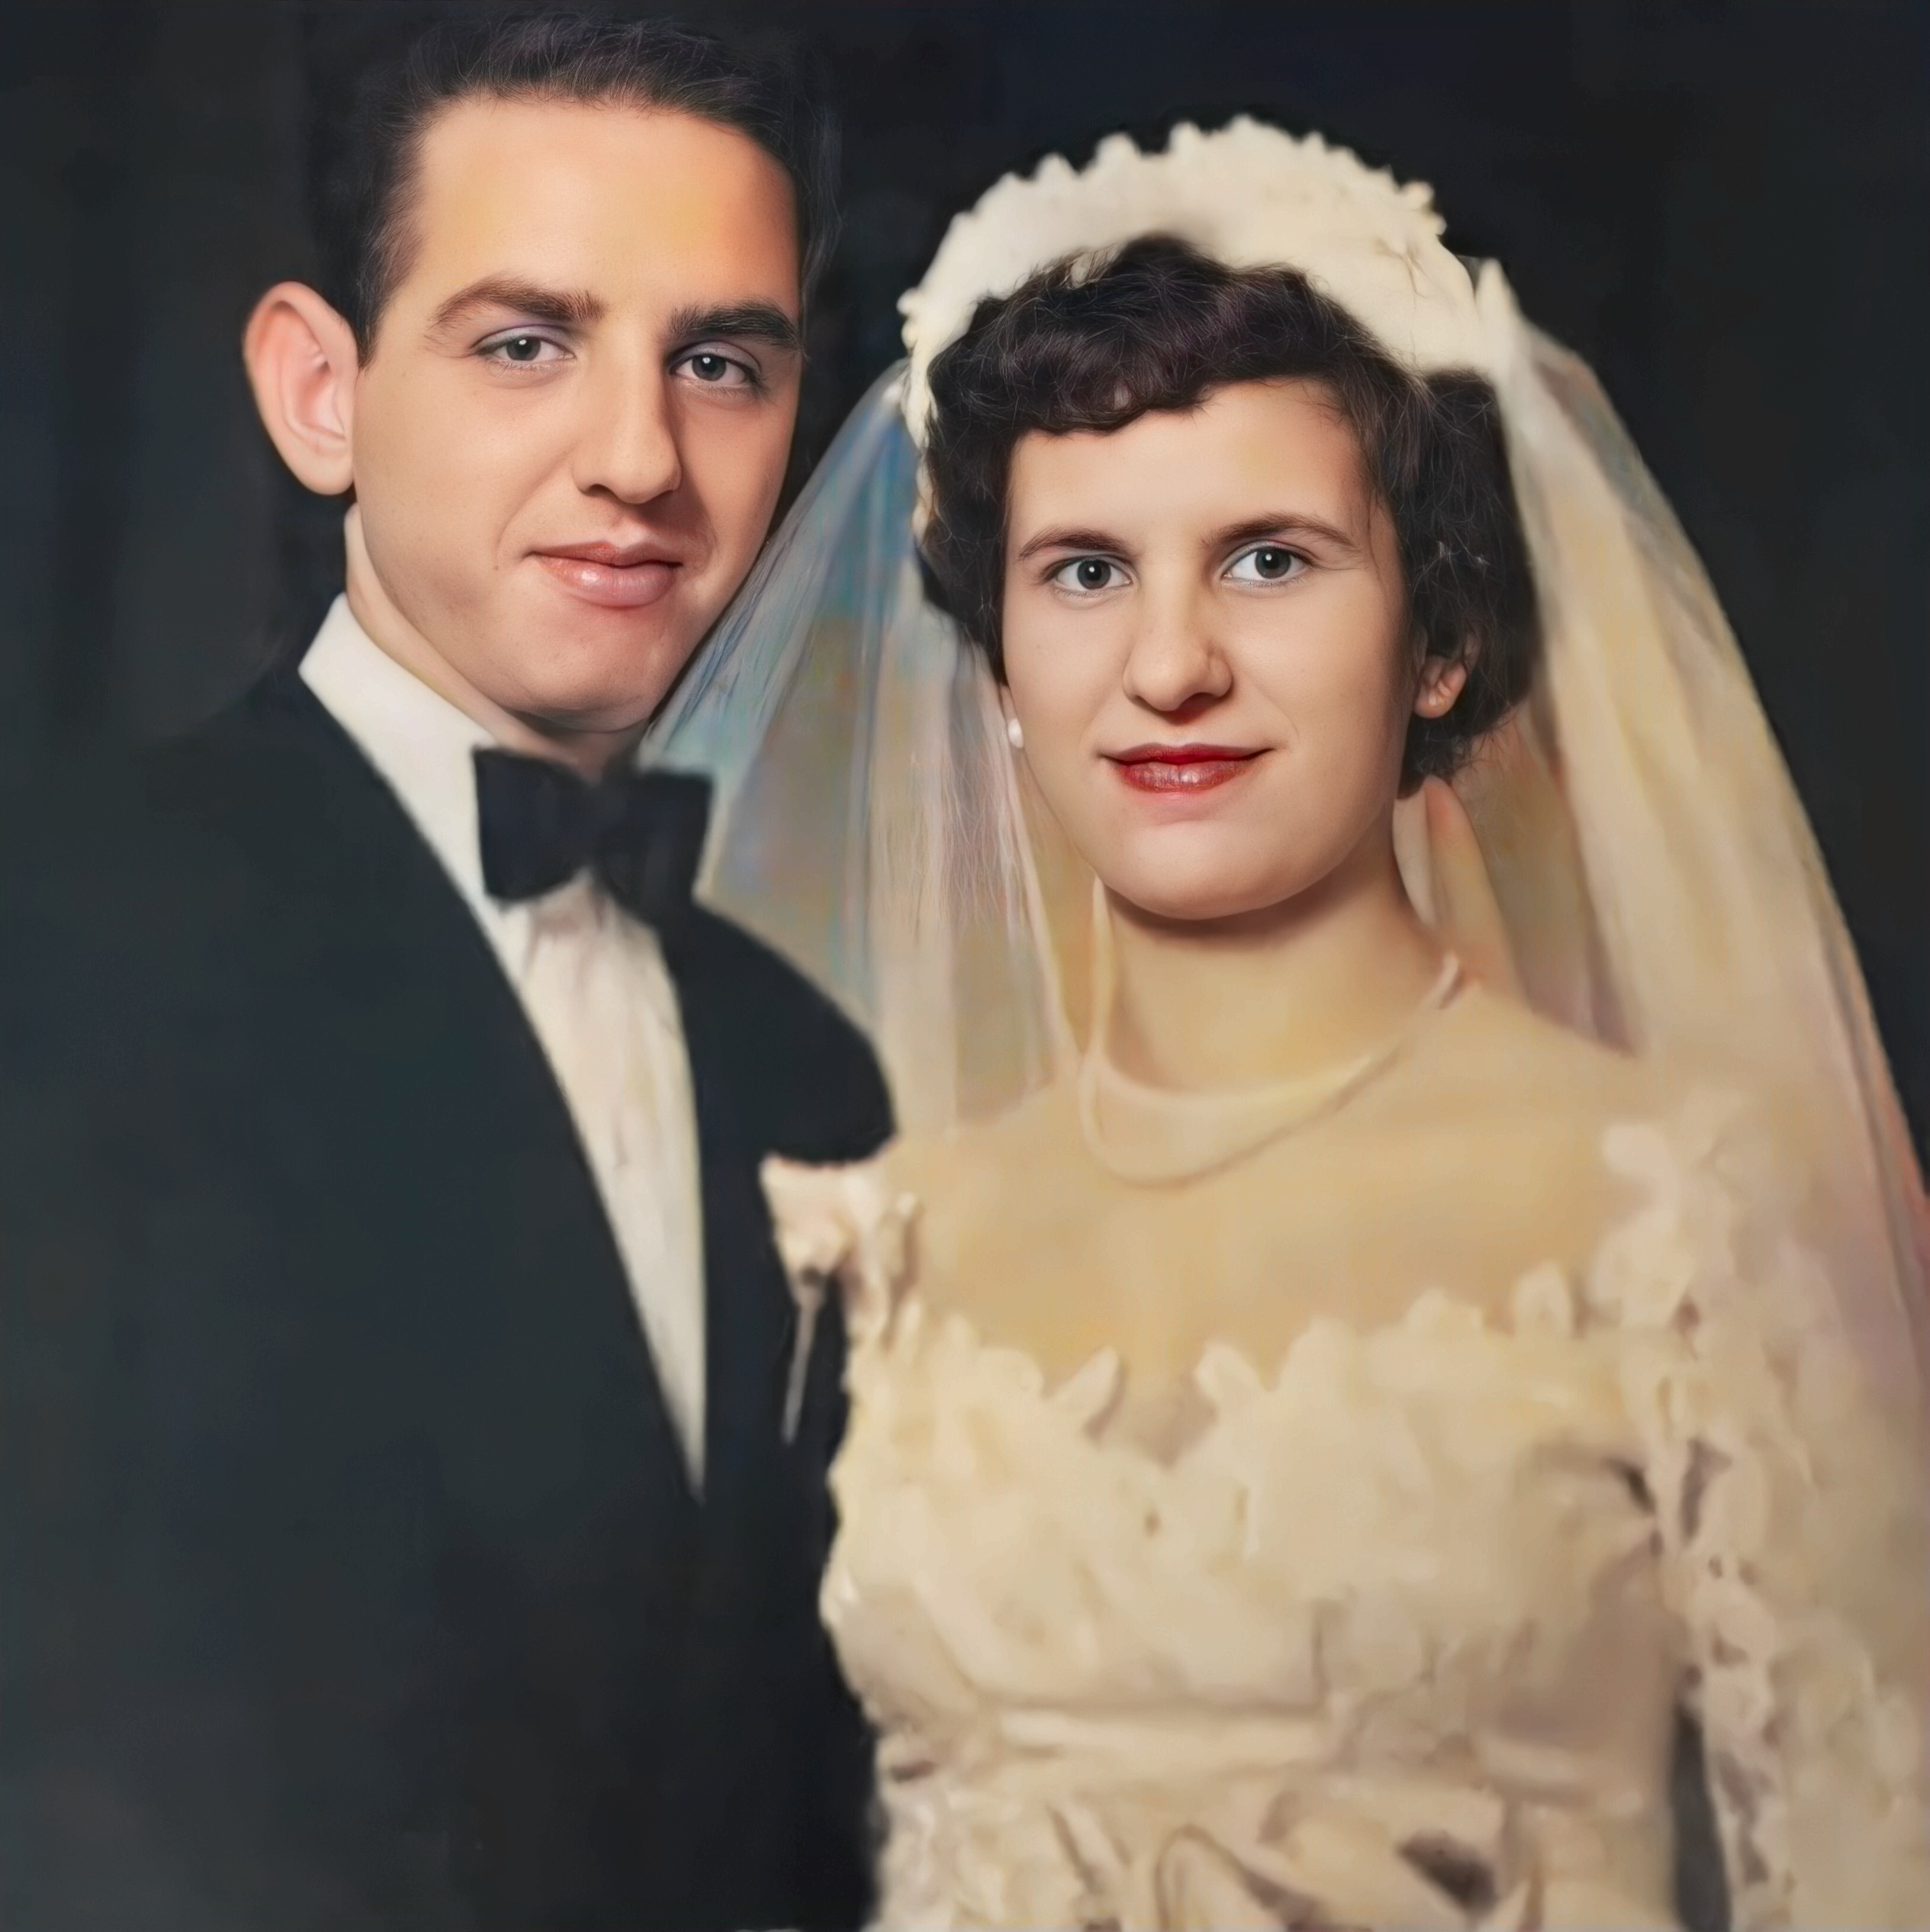 My grandparents Salvatore Pupillo and Grace Orlando on their wedding day in 1950